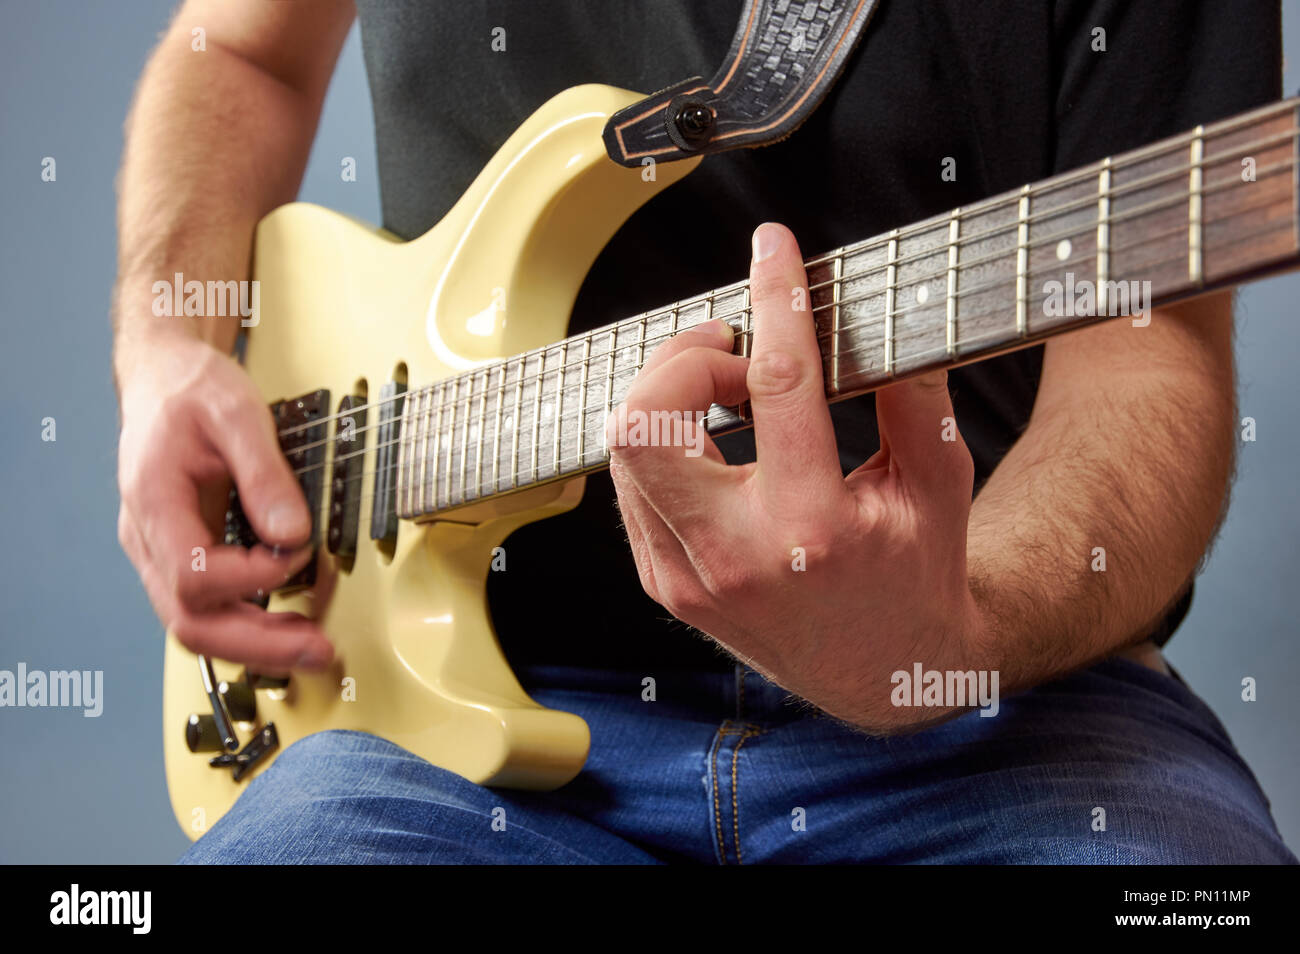 A man in a black shirt and jeans playing an electric guitar. Fingers detail, blue background. Stock Photo